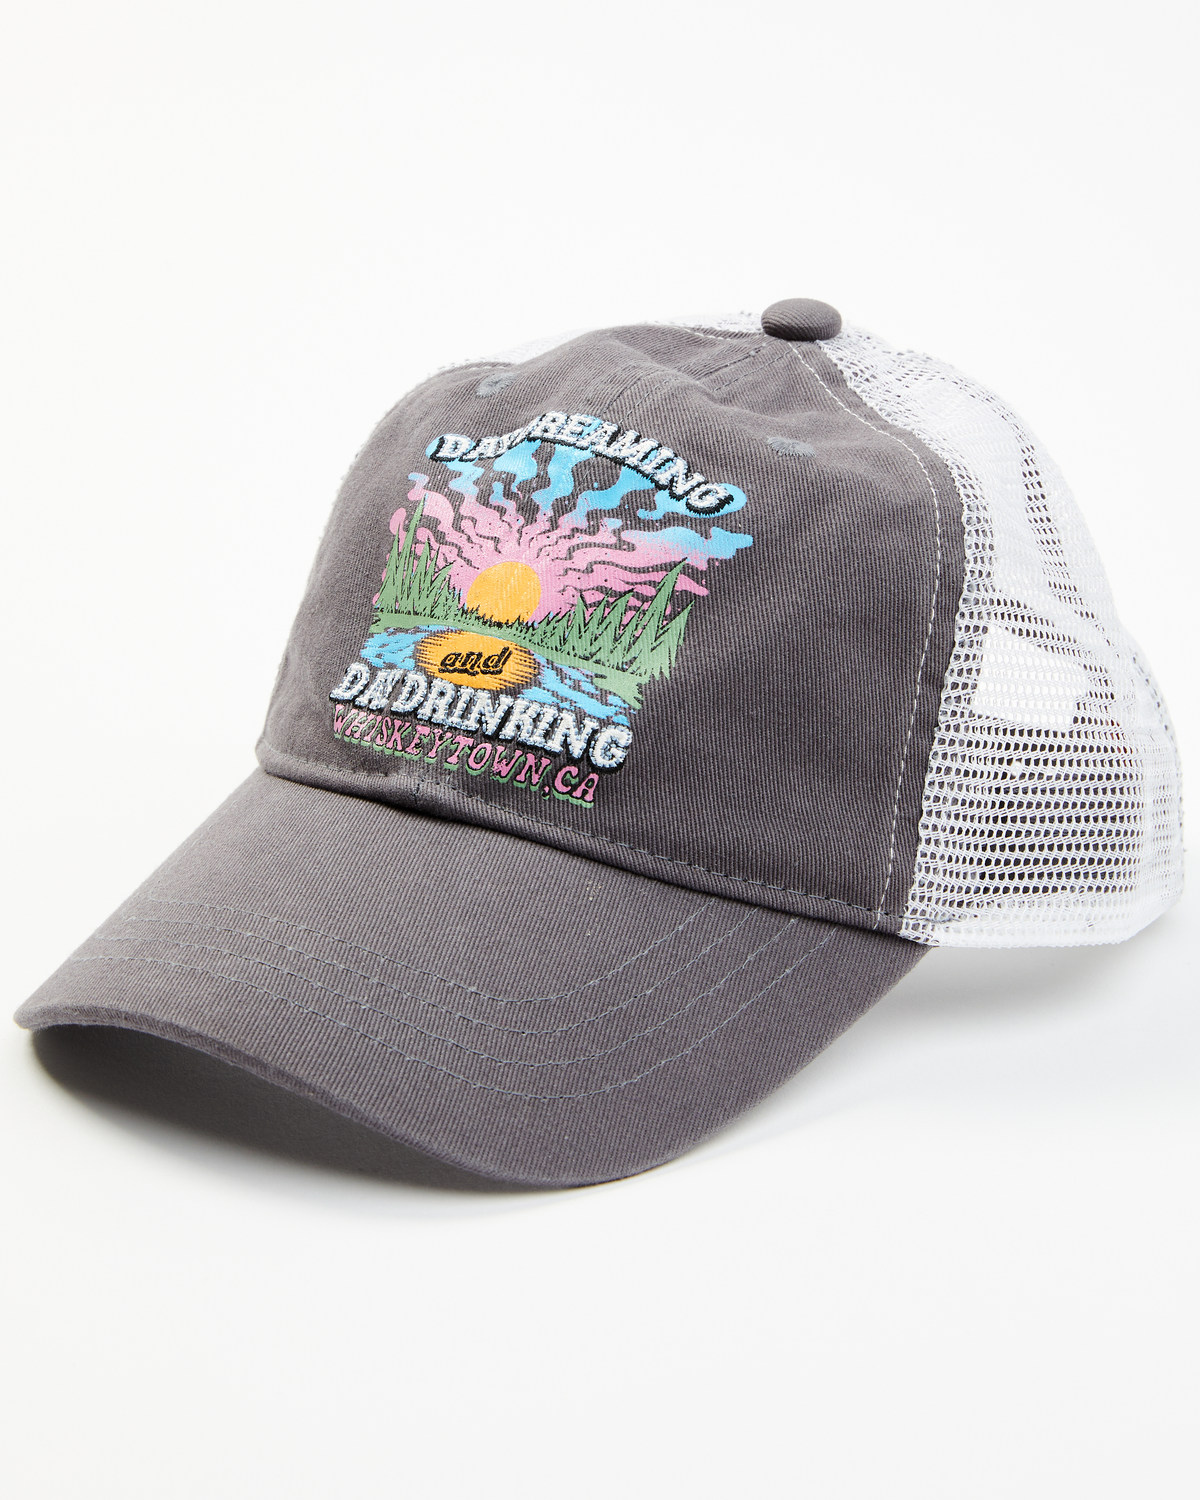 Cleo + Wolf Women's Day Dreaming & Day Drinking Ball Cap